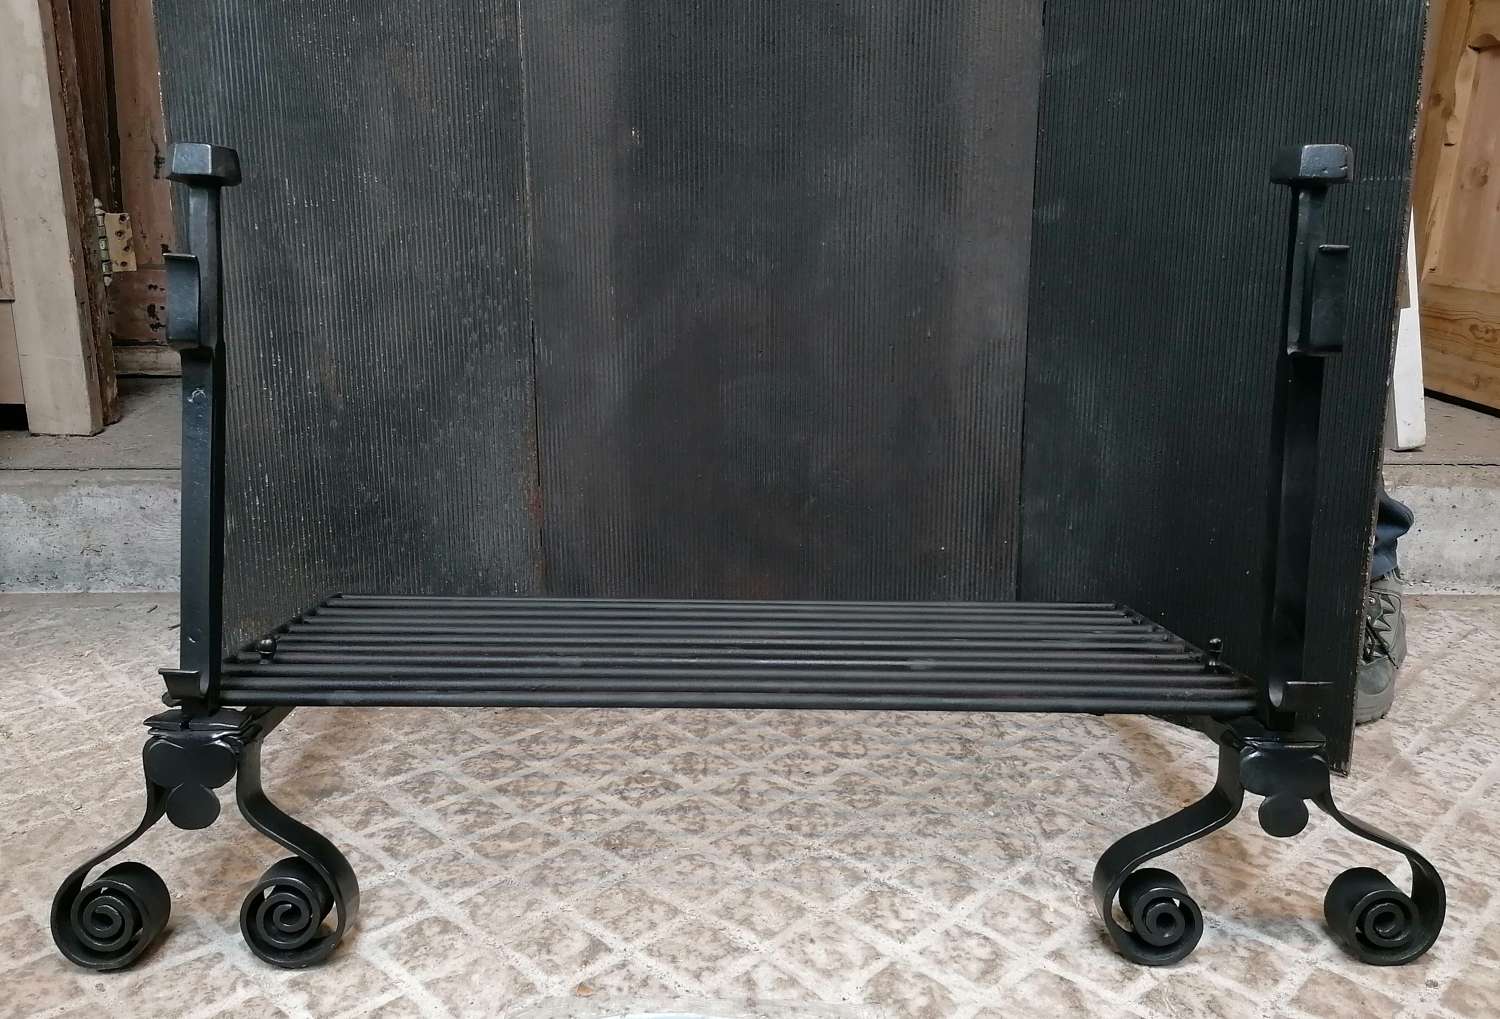 FB0070 LARGE RECLAIMED CAST IRON FIRE GRILL & FIRE DOGS FIRE PIT?